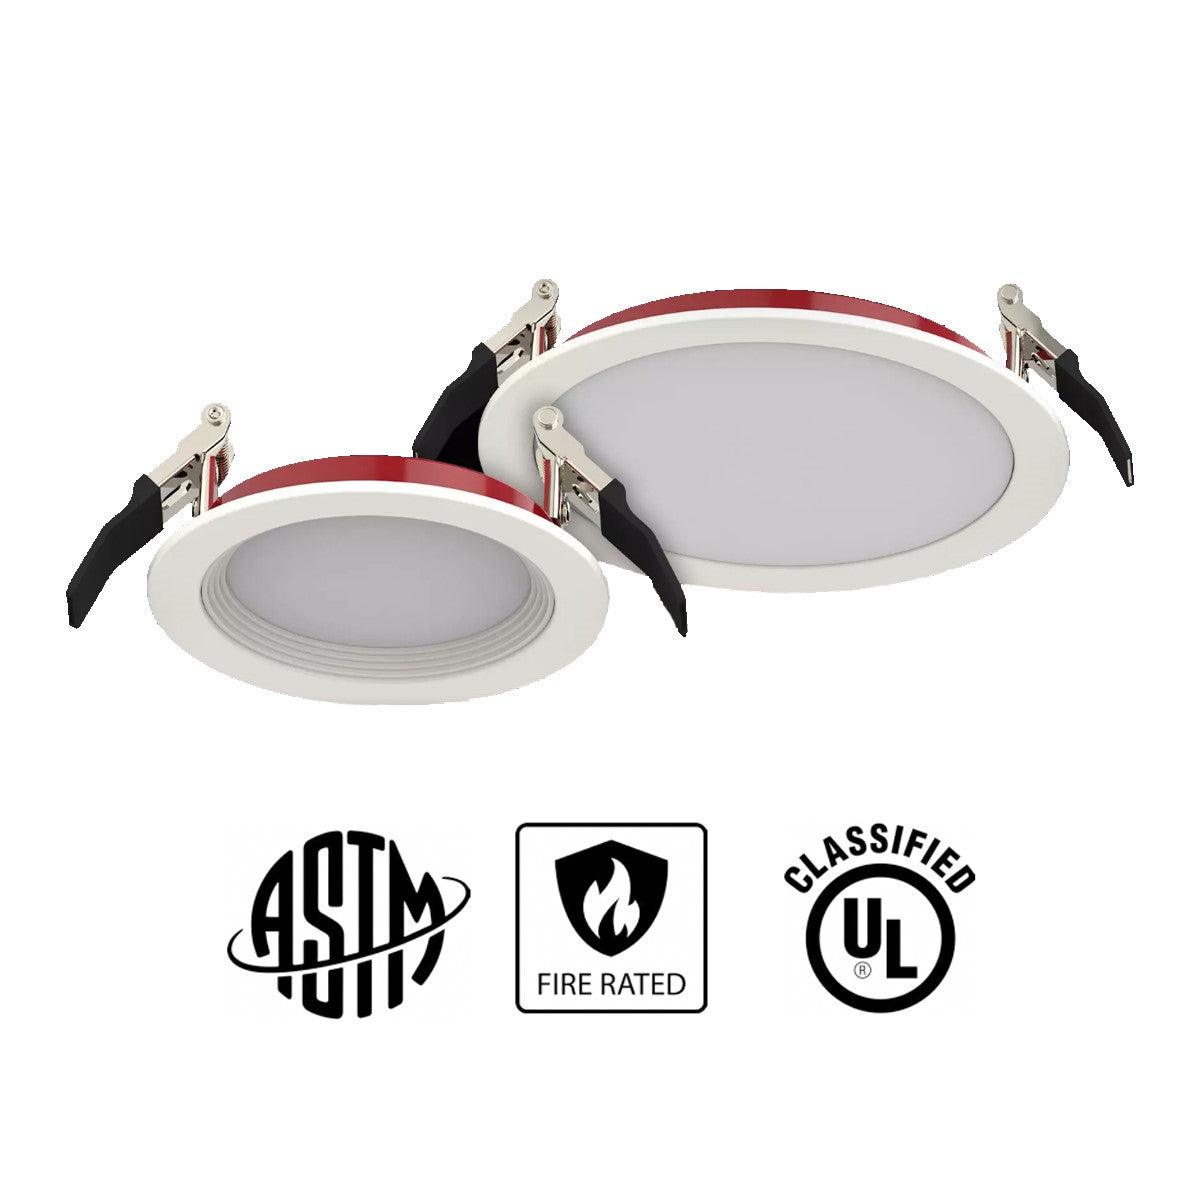 6 In. Edge-Lit Fire Resistant Wafer Canless LED Downlight, 15 Watt, 1400 Lumens, Selectable CCT, 2700K to 5000K, Smooth Trim - Bees Lighting